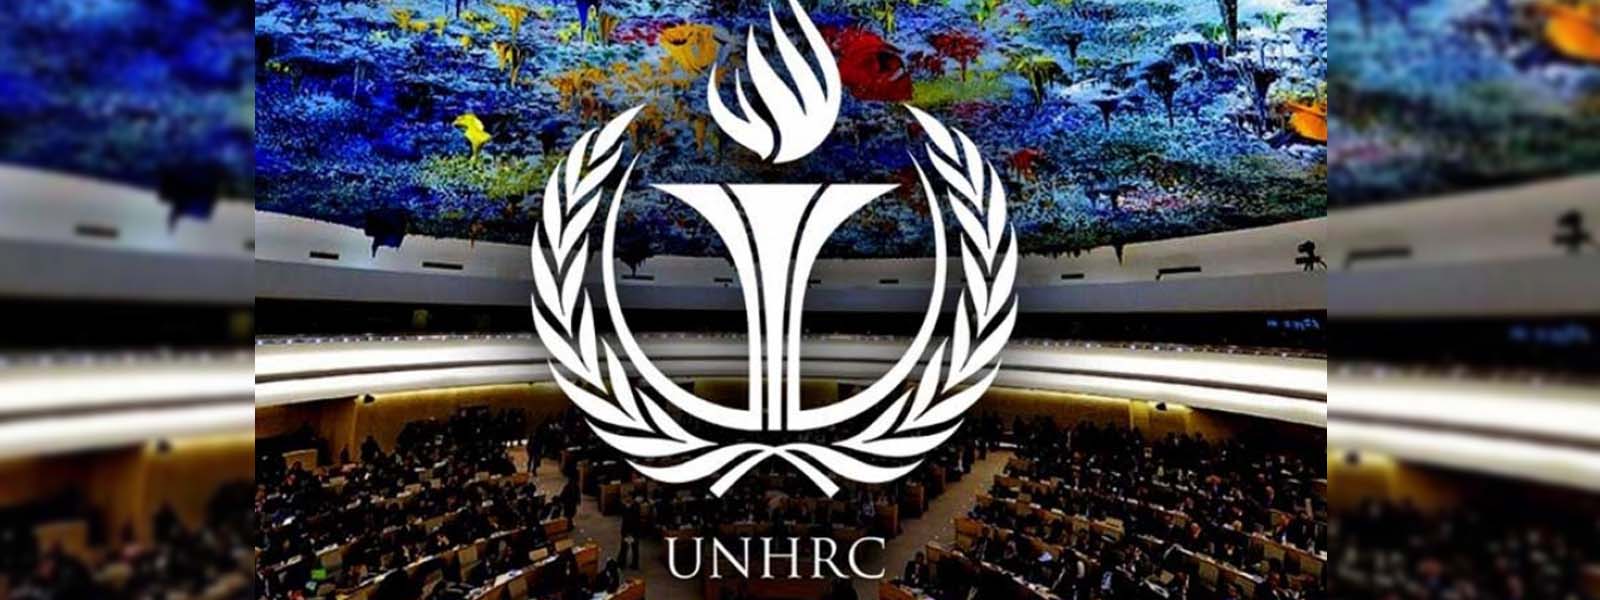 49th Session of UNHRC begins in Geneva today (28)